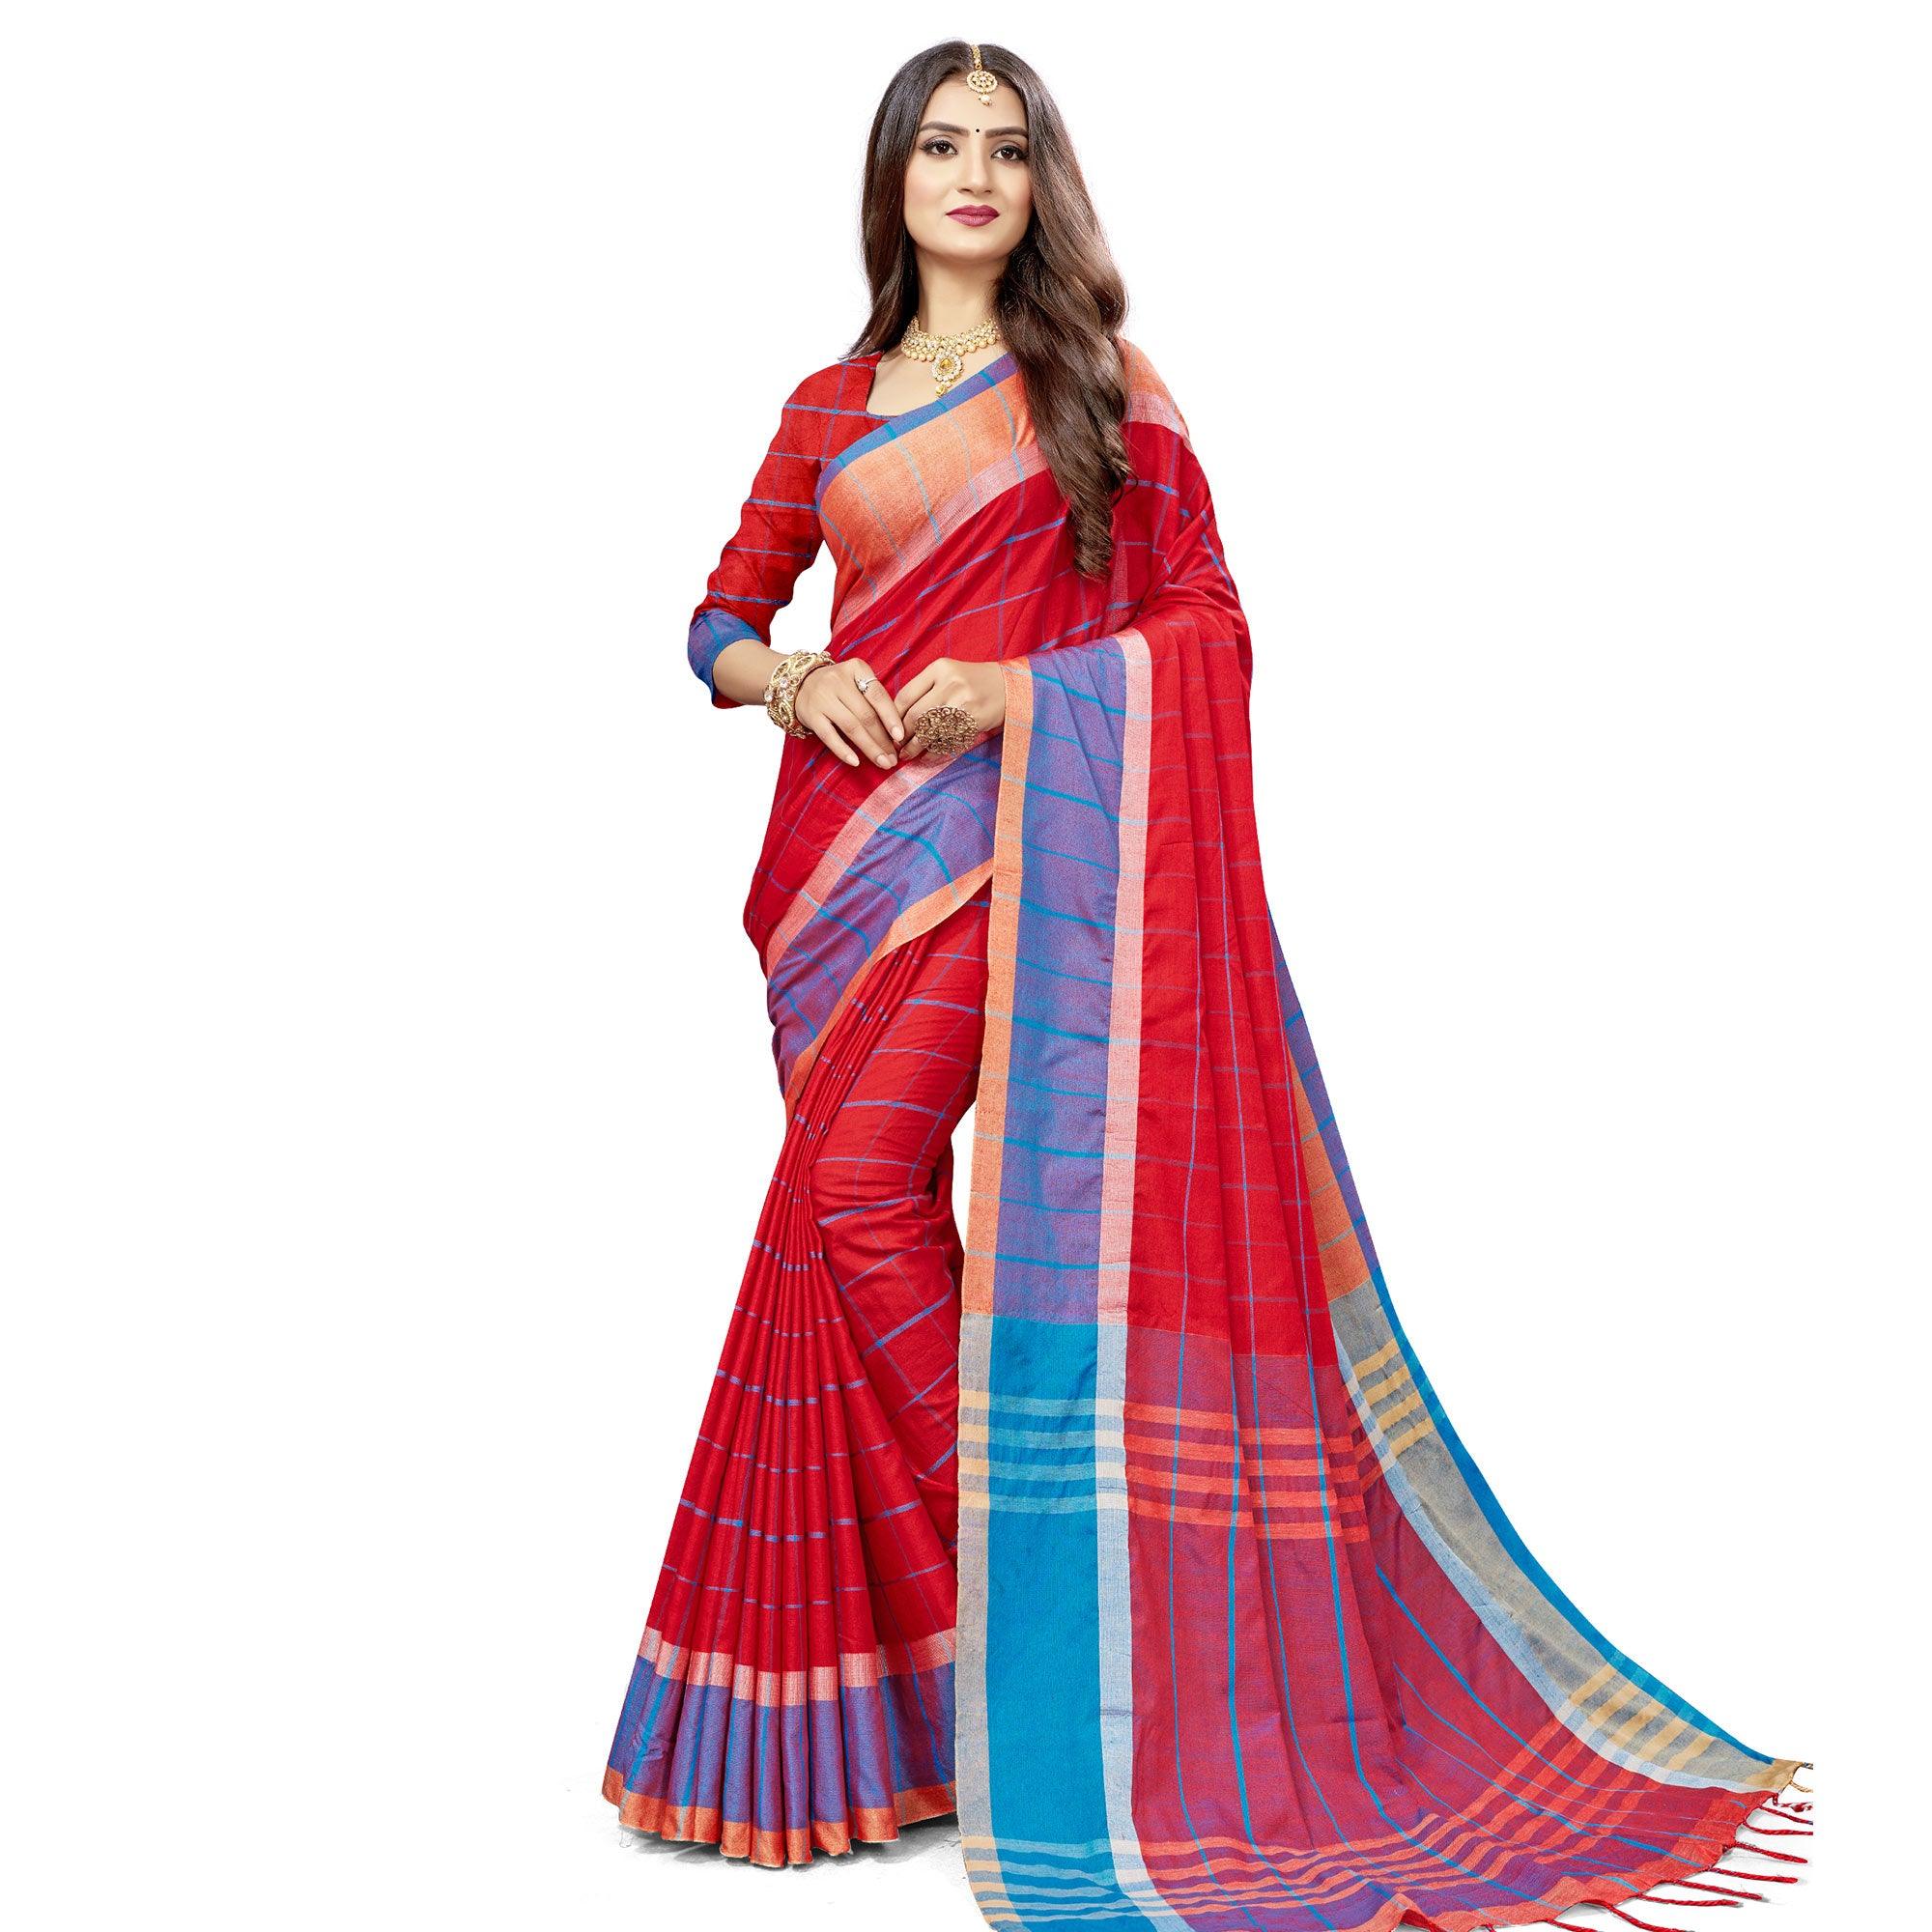 Jazzy Red Colored Festive Wear Stripe Printed Cotton Silk Saree With Tassels - Peachmode